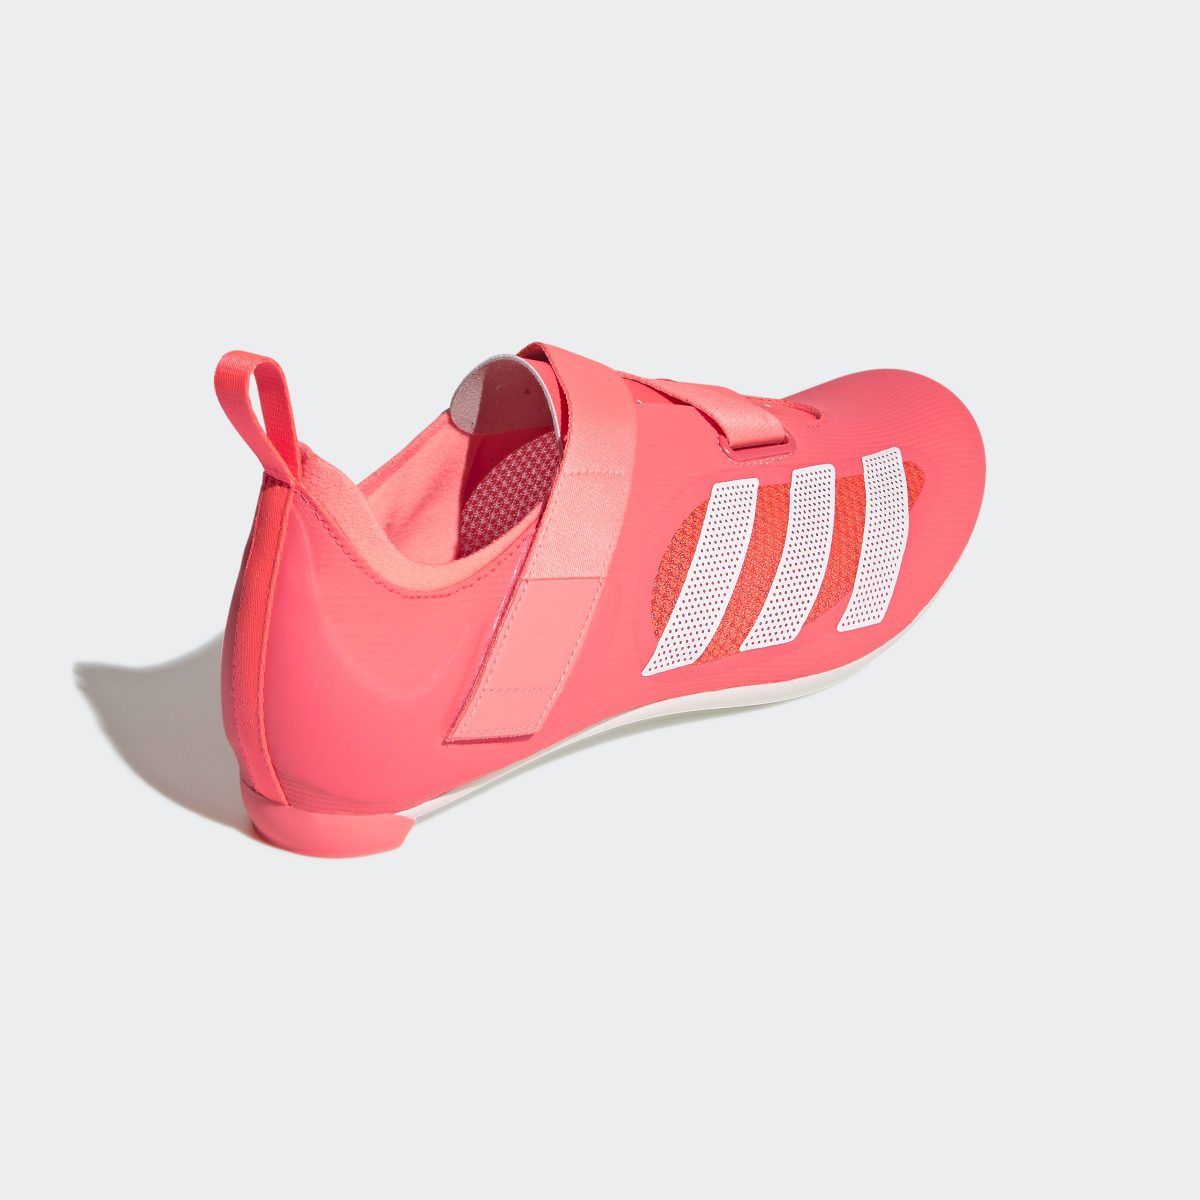 Adidas THE INDOOR CYCLING SHOE. 11